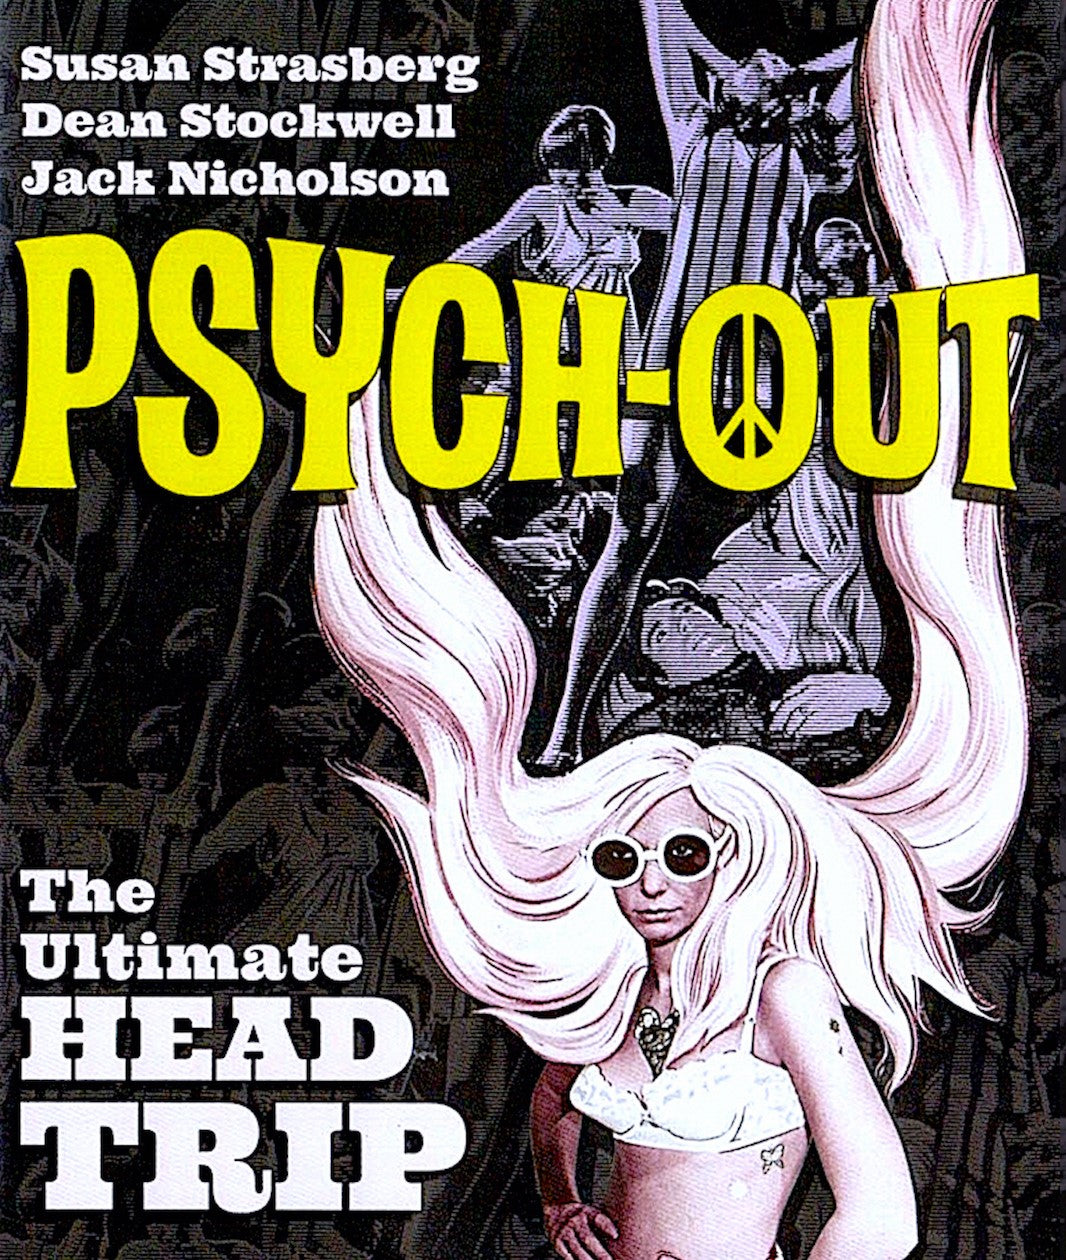 PSYCH-OUT BLU-RAY